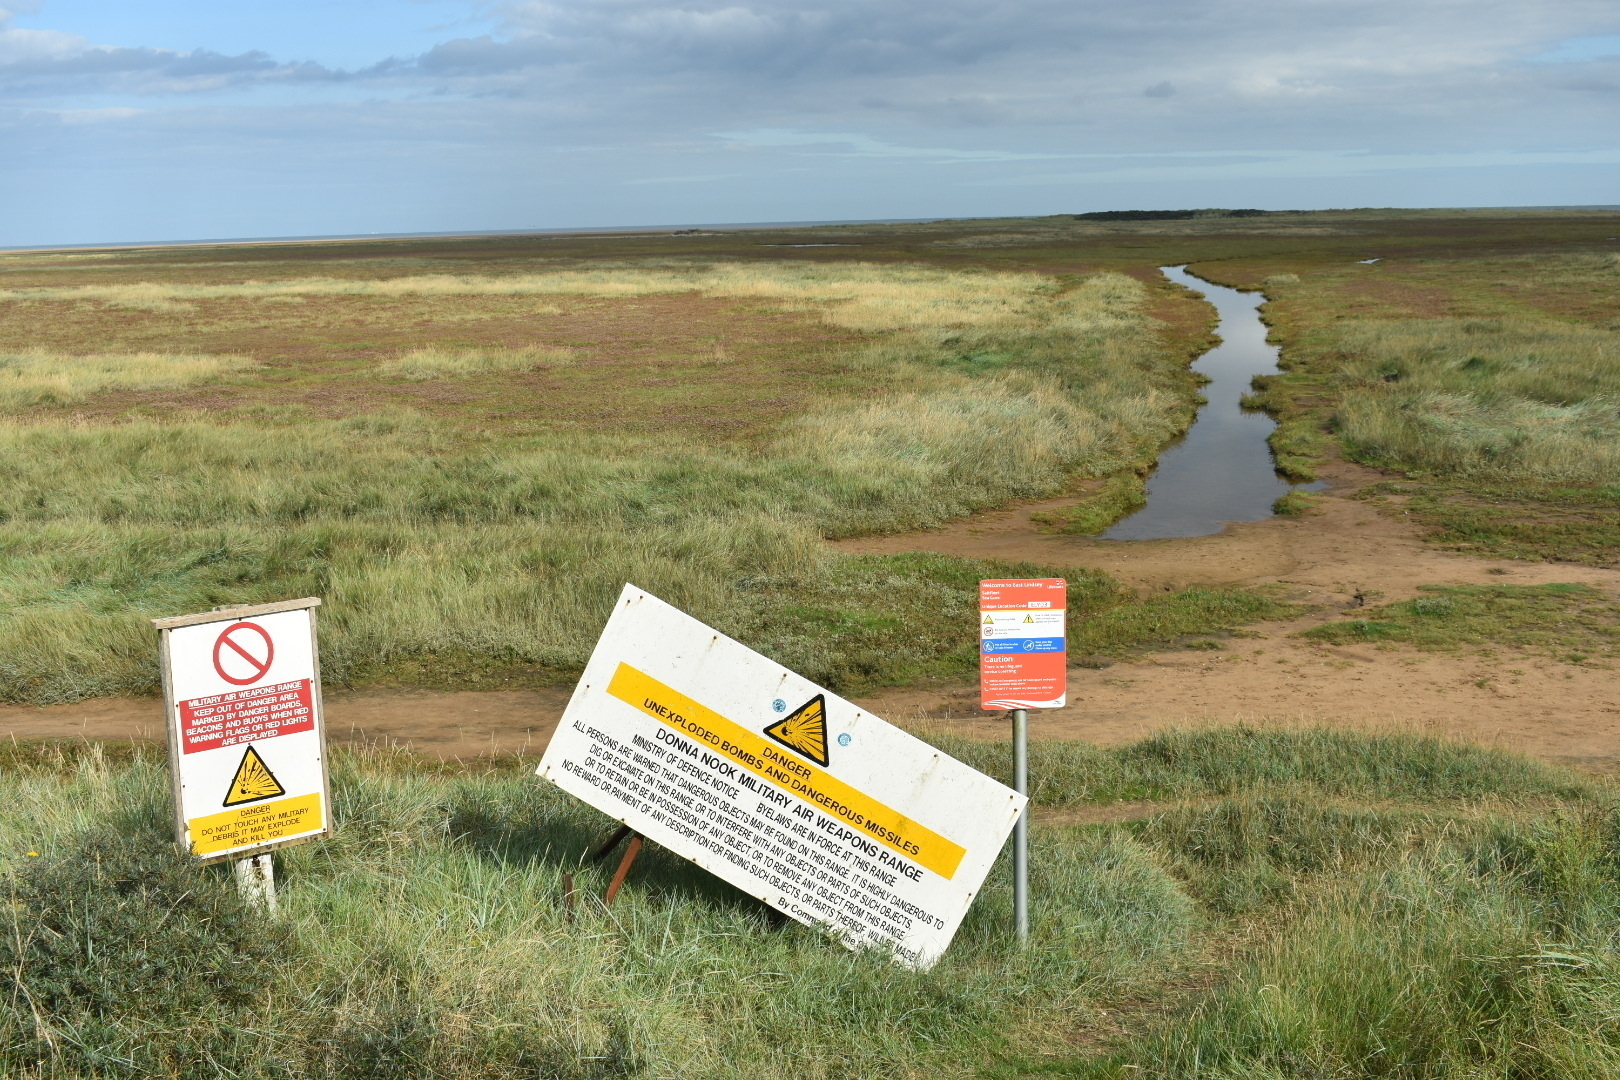 A panoramic view of mudflats and salt marsh with a creek winding into the distance. In the foreground are two warning signs that the area is a military air weapons range and there may be unexploded bombs!